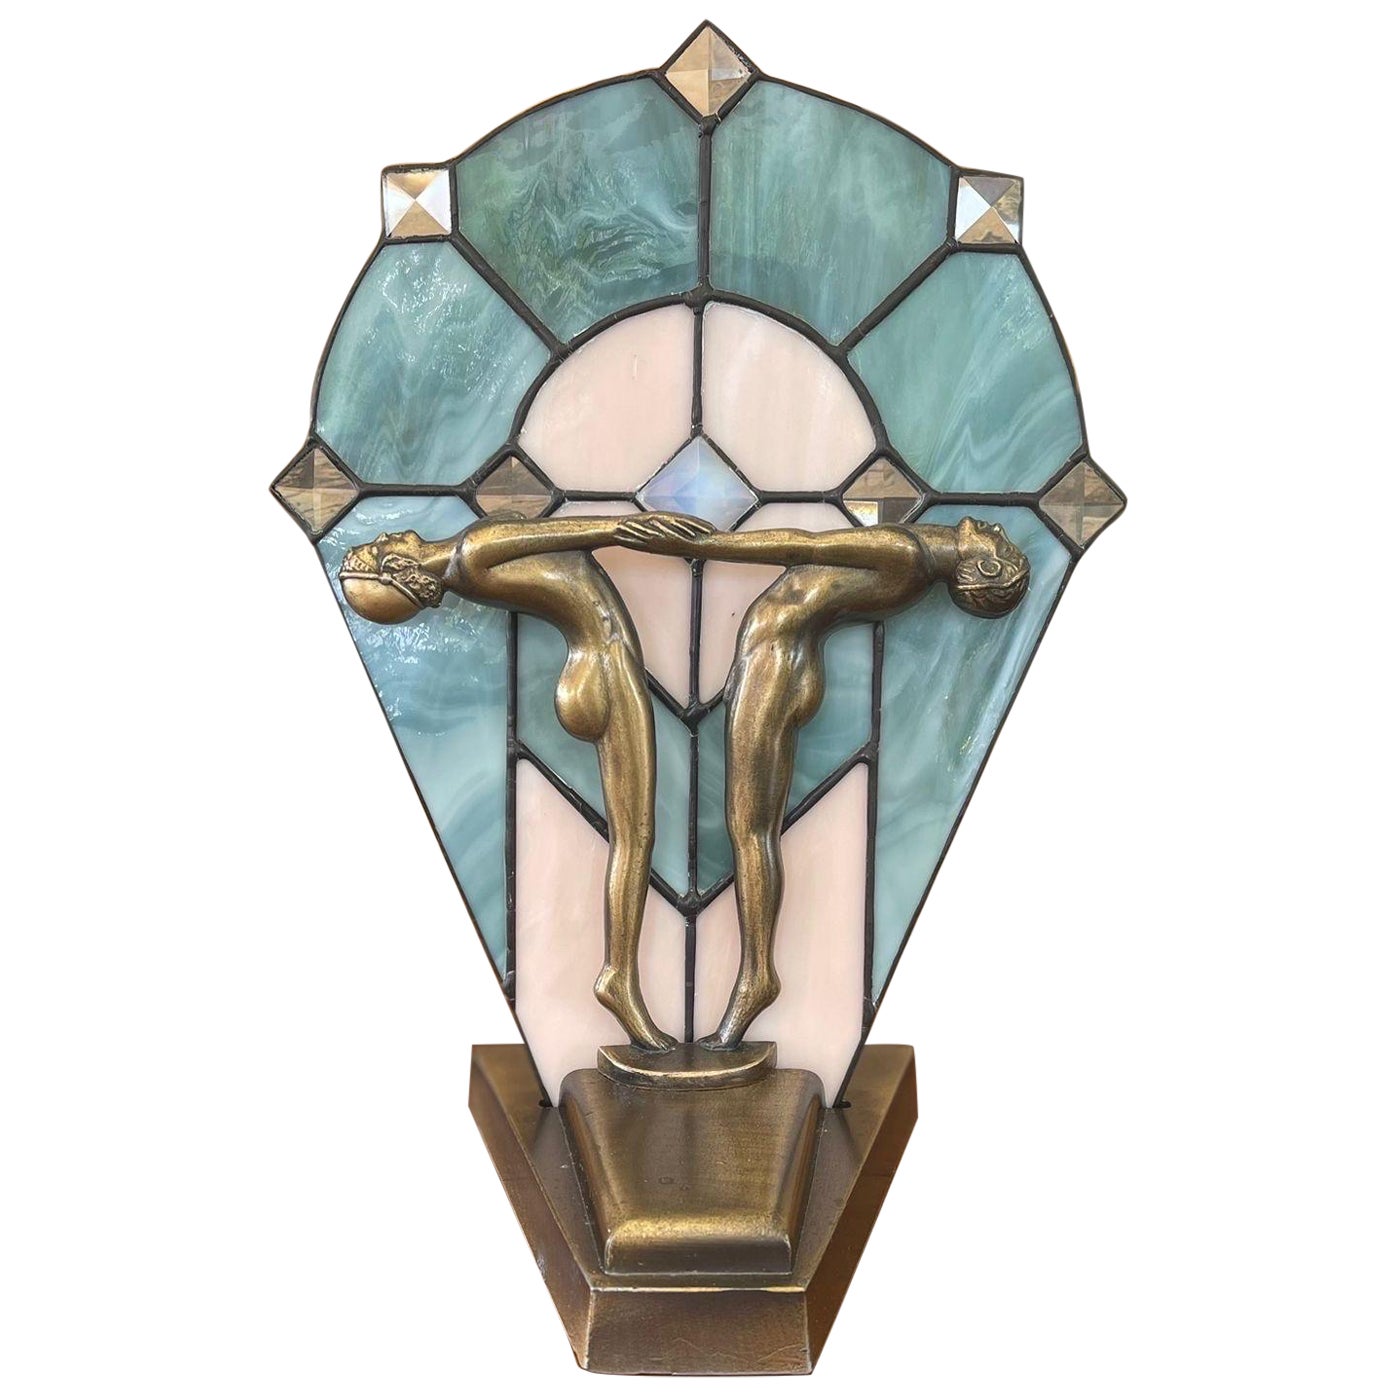 Vintage Art Deco Stained Glass Nude Figurine Blue Lamp 